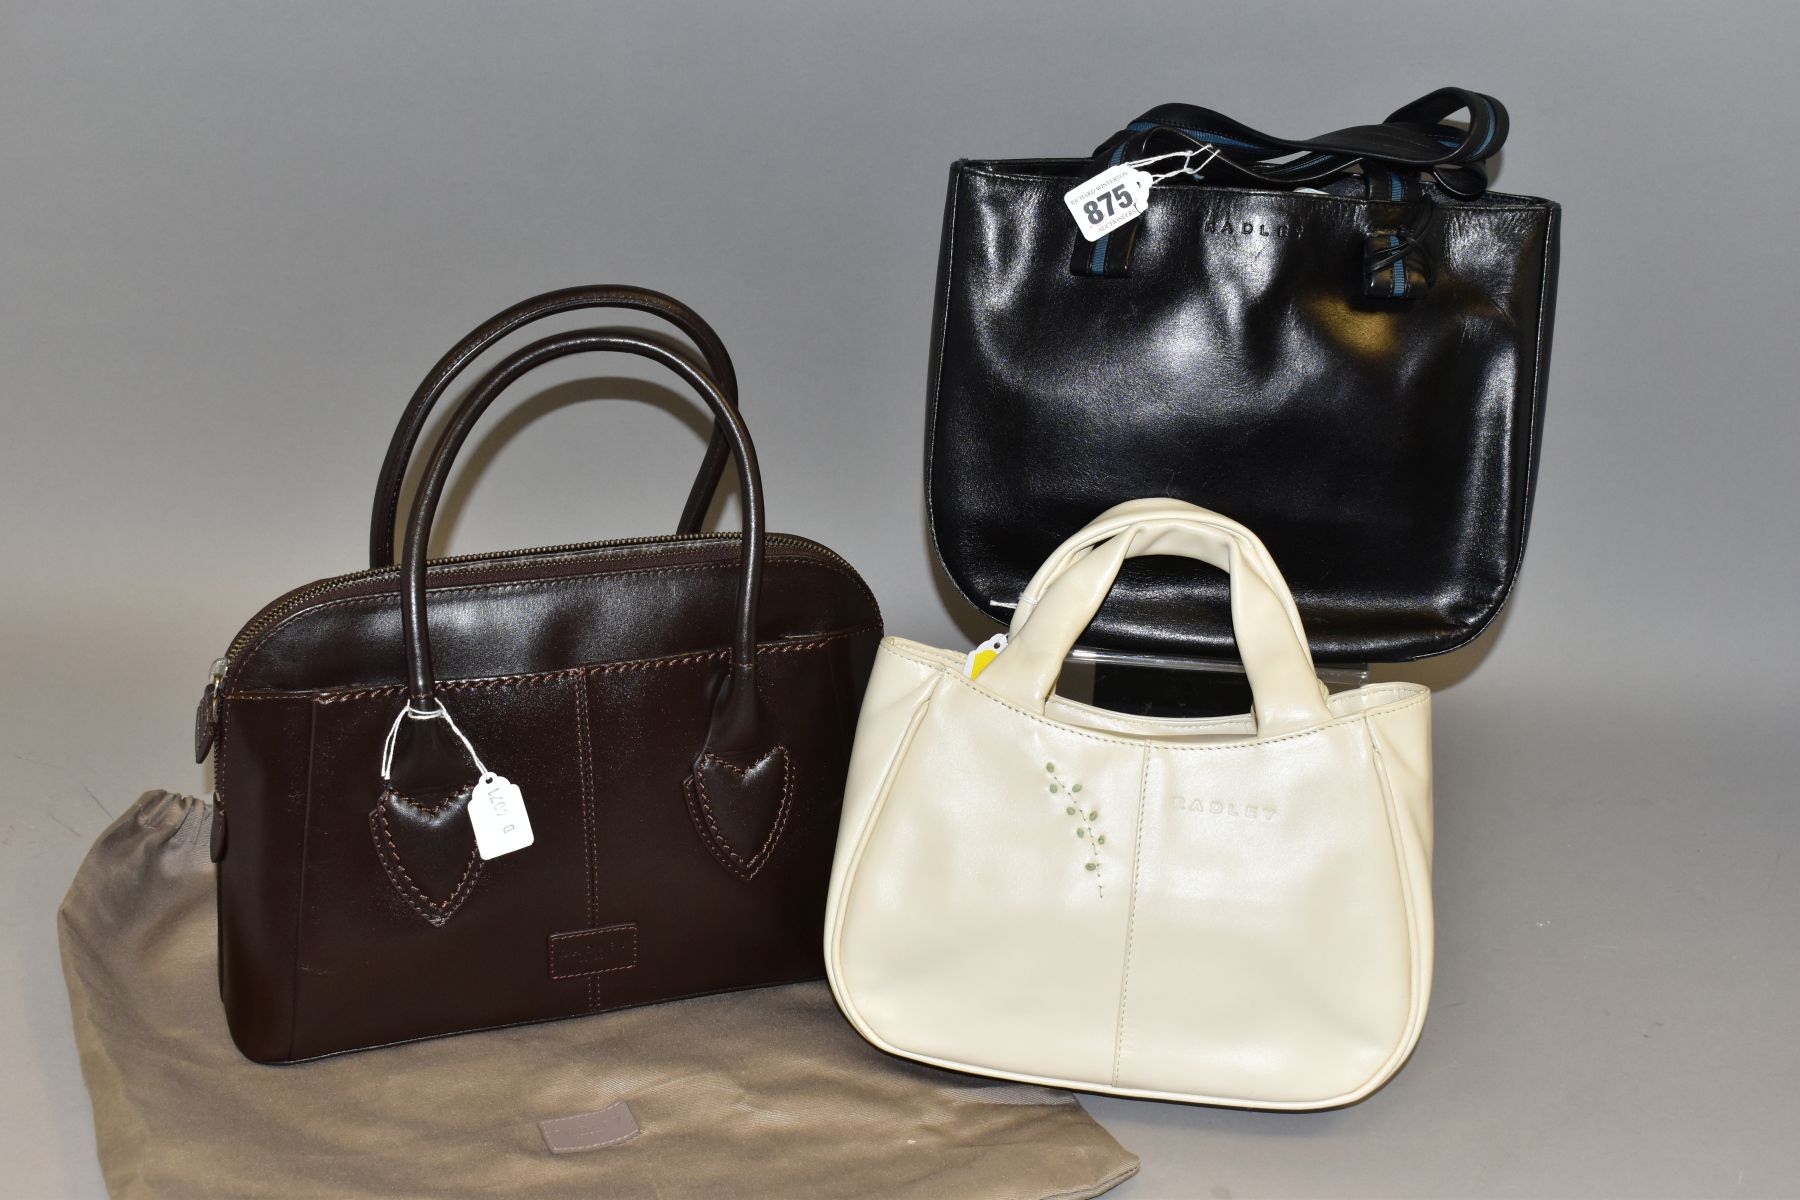 THREE RADLEY HANDBAGS, comprising a cream leather bag with stitched outlines of doves and olive